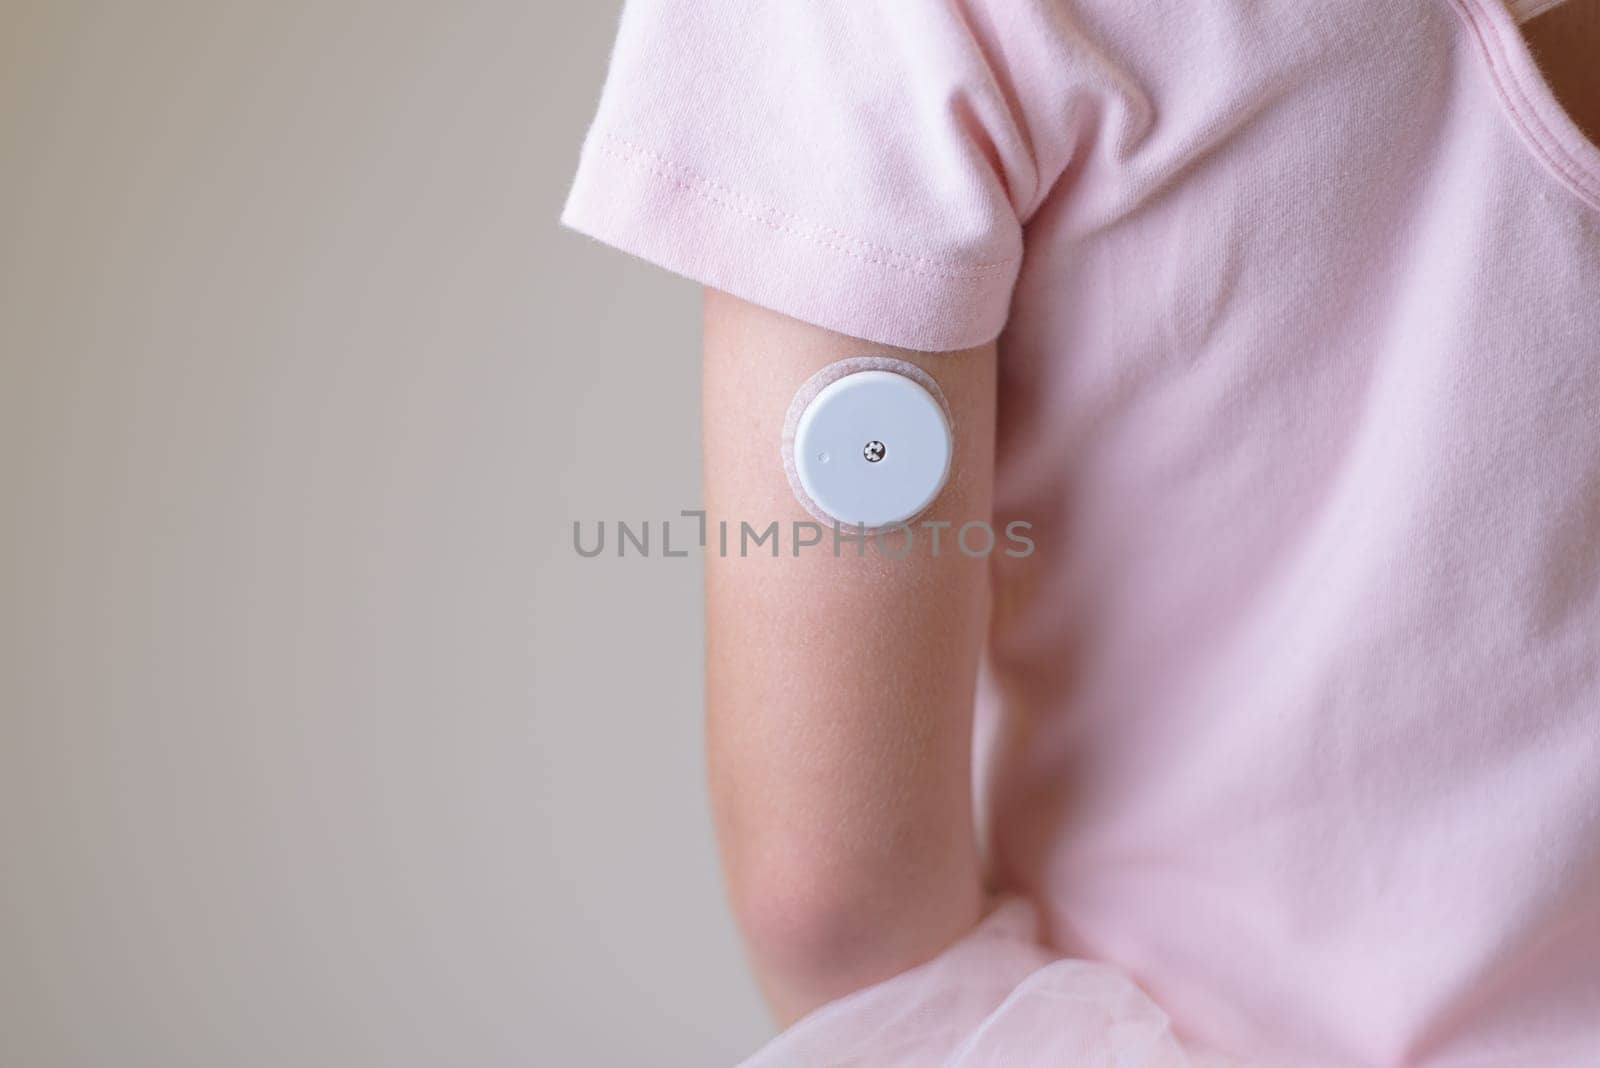 Blood glucose sensor on the arm of a child. Sensor for remote measurement of blood glucose levels using NFC technology on a mobile phone or reader.